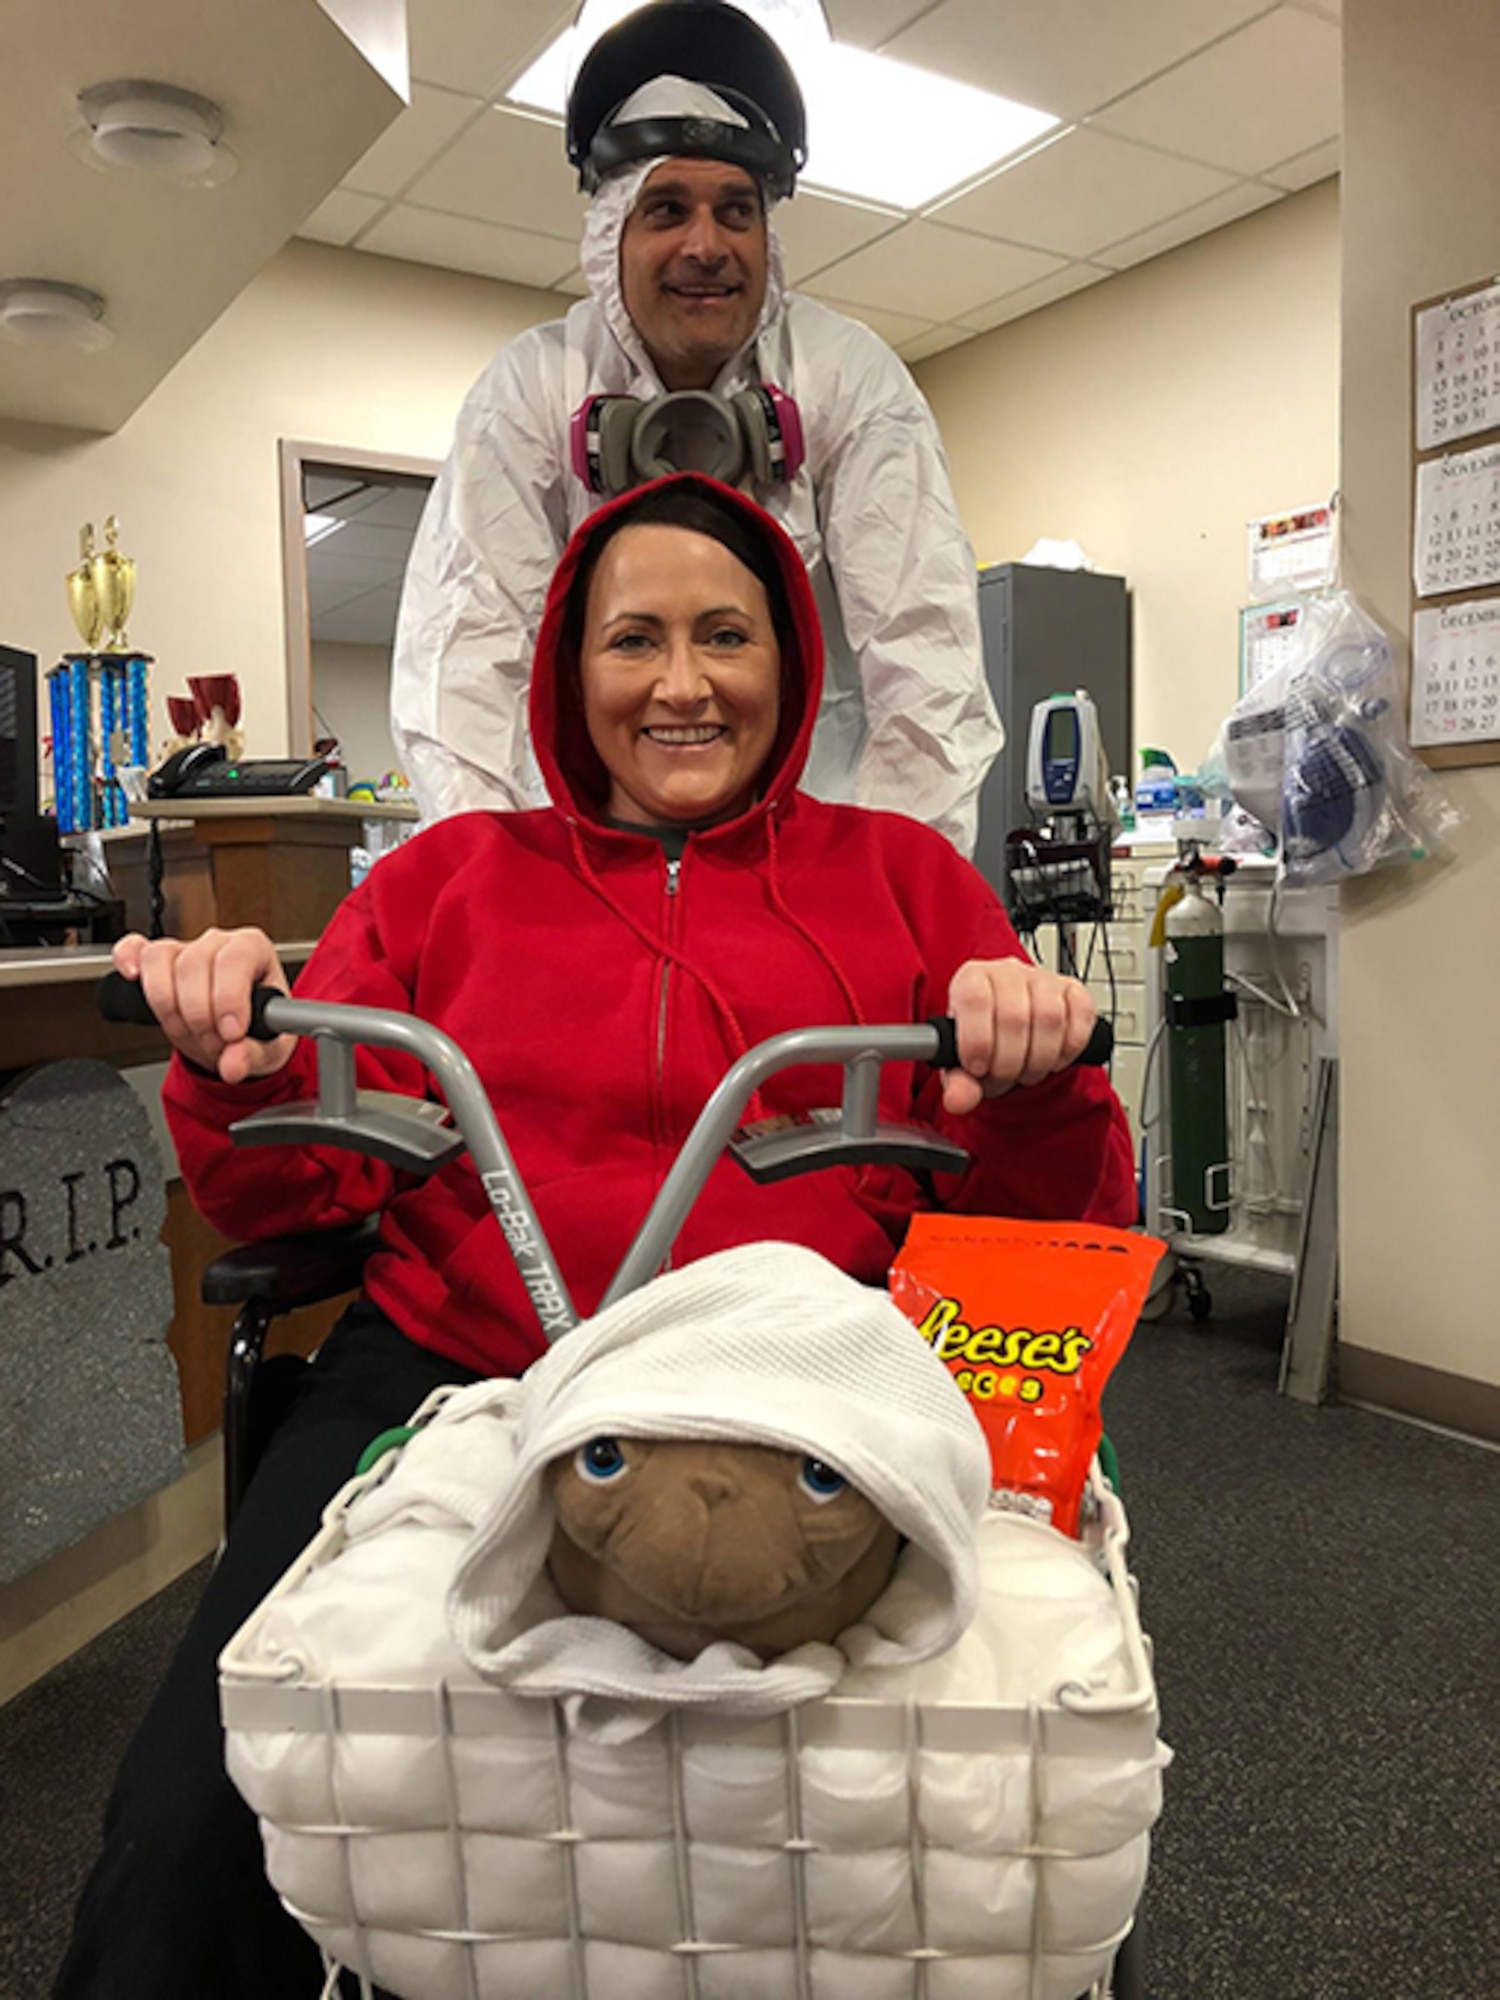 Maj. Stephanie Proellochs and her husband, John, dress up as characters from the movie, “E.T.” Proellochs, along with other patients and healthcare providers, celebrated Halloween at Walter Reed National Military Medical Center, Oct 31, 2017. (Courtesy Photo)